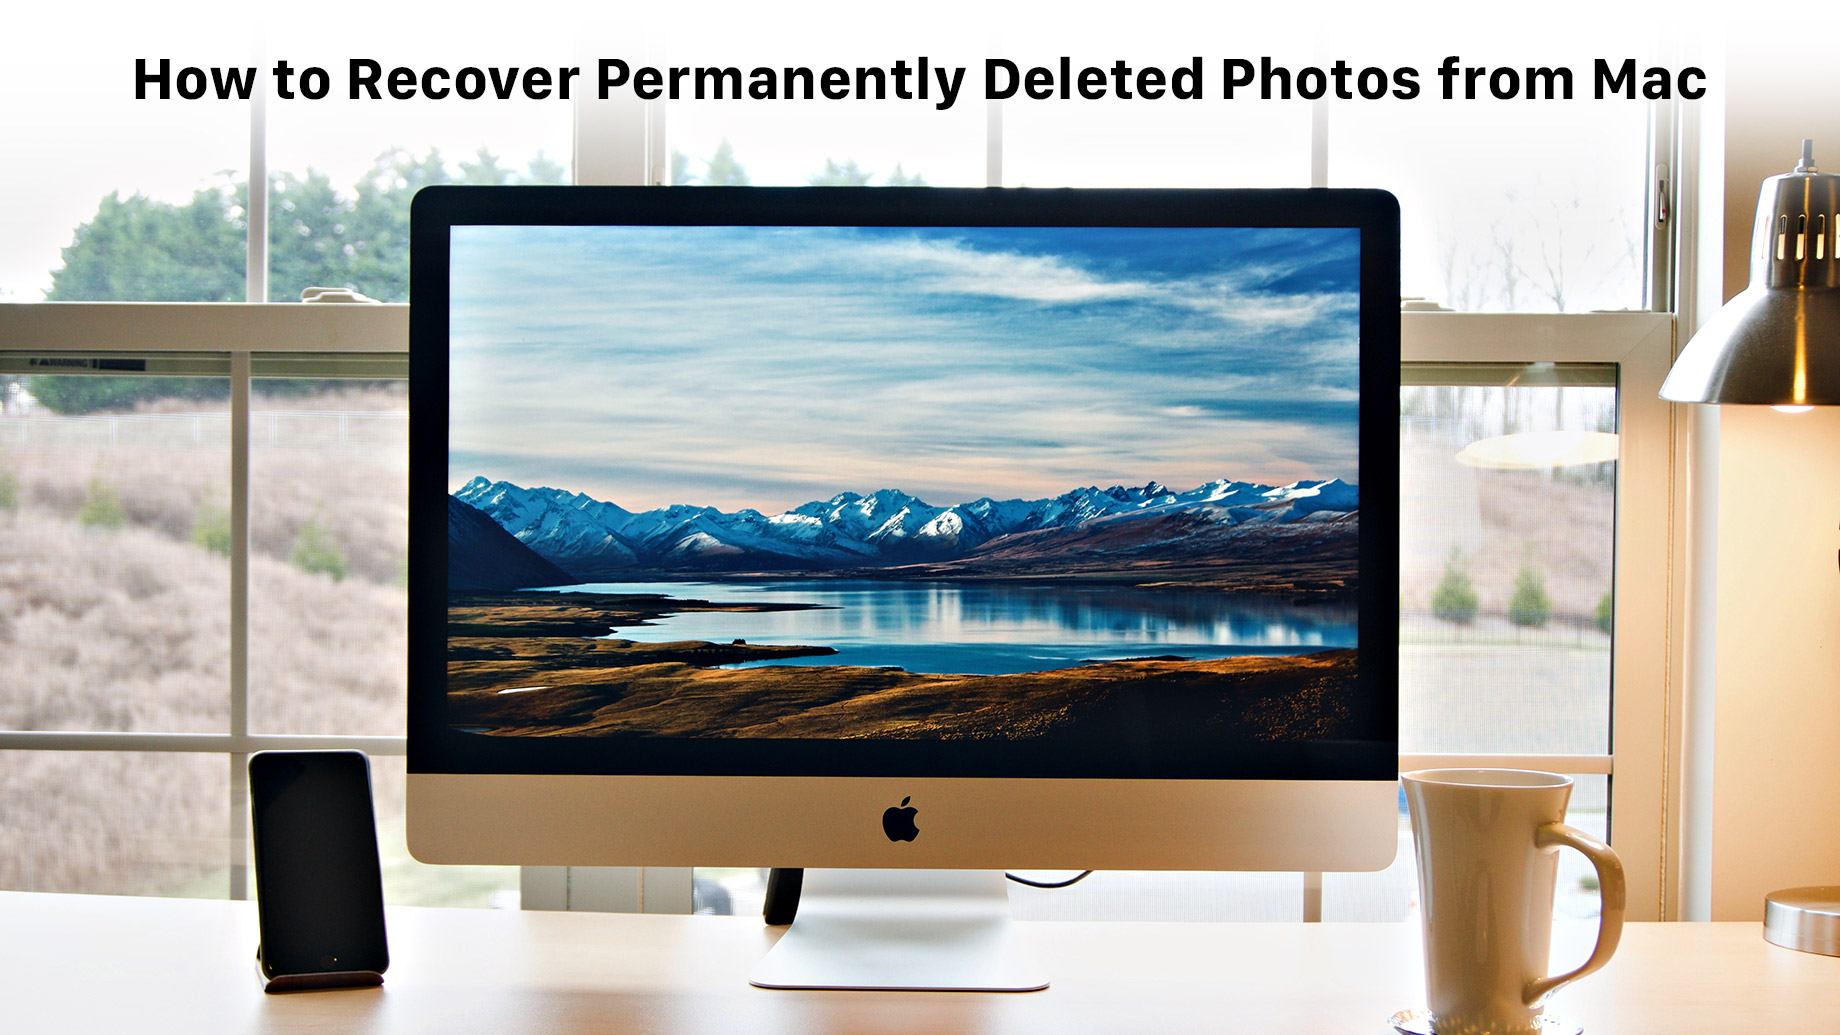 How to Recover Permanently Deleted Photos from Mac